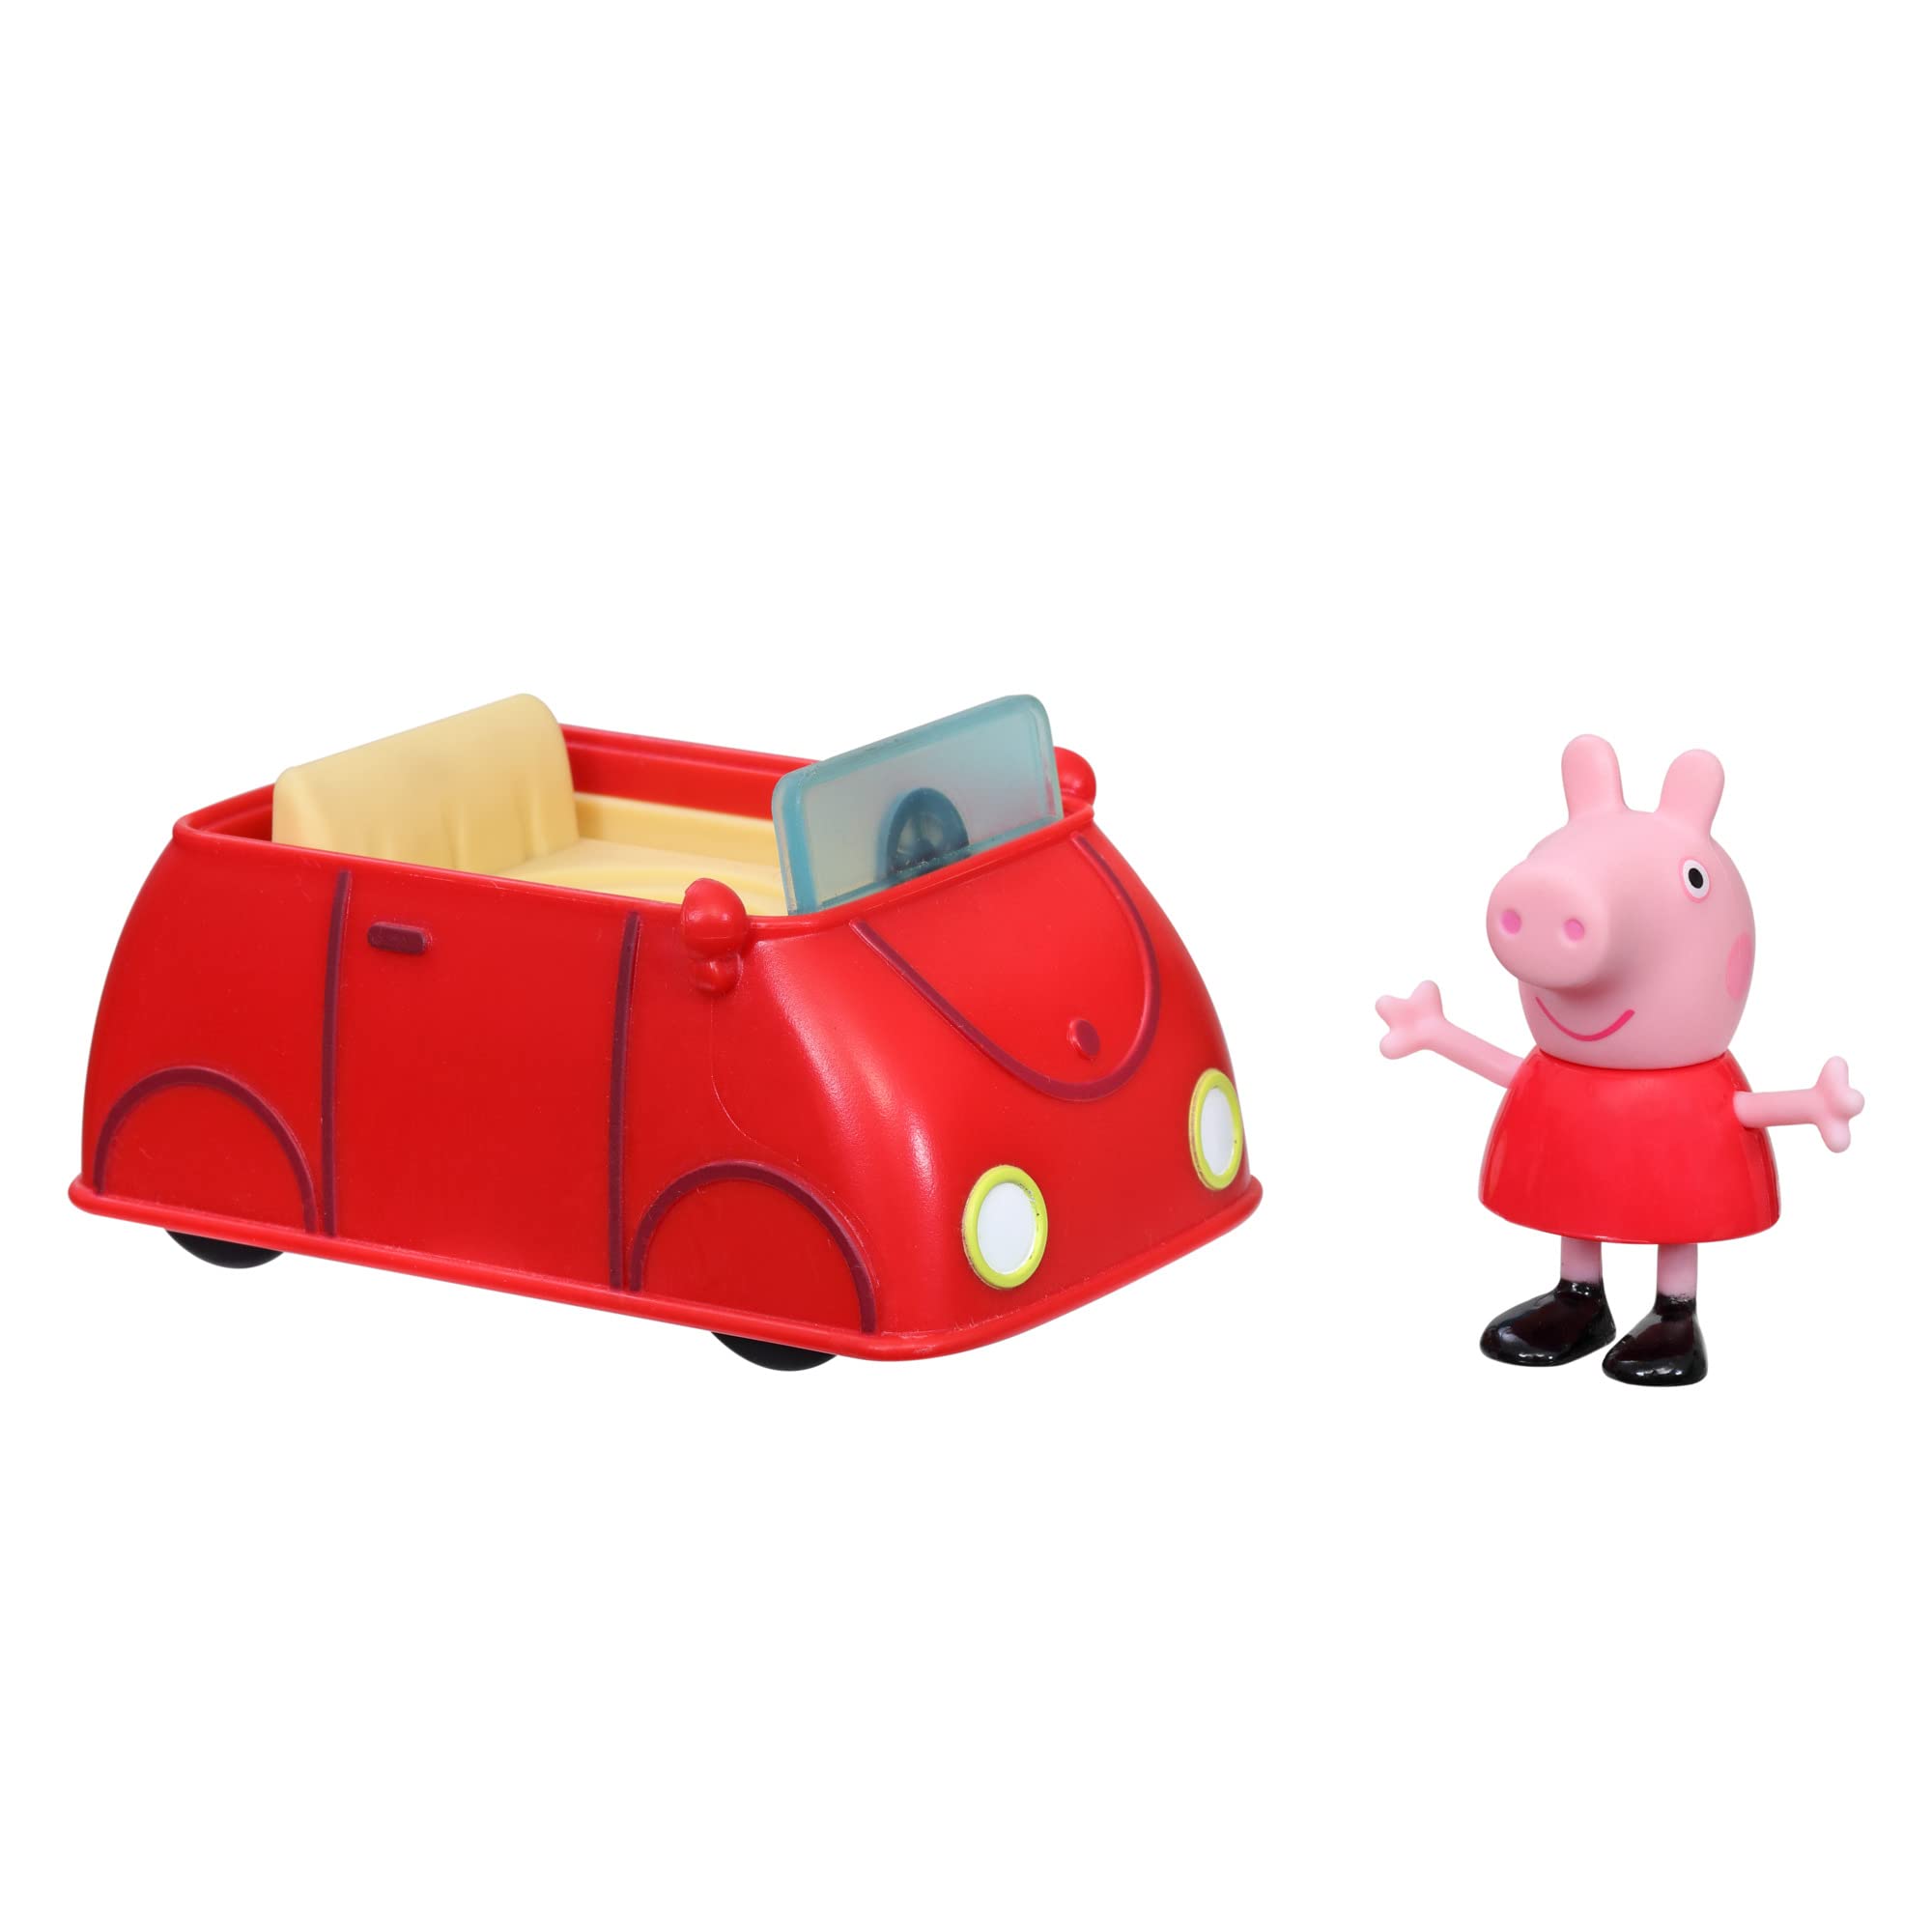 Peppa Pig Peppa's Adventures Little Red Car Toy Includes 3-inch Figure, Inspired by The TV Show, for Preschoolers Ages 3 and Up